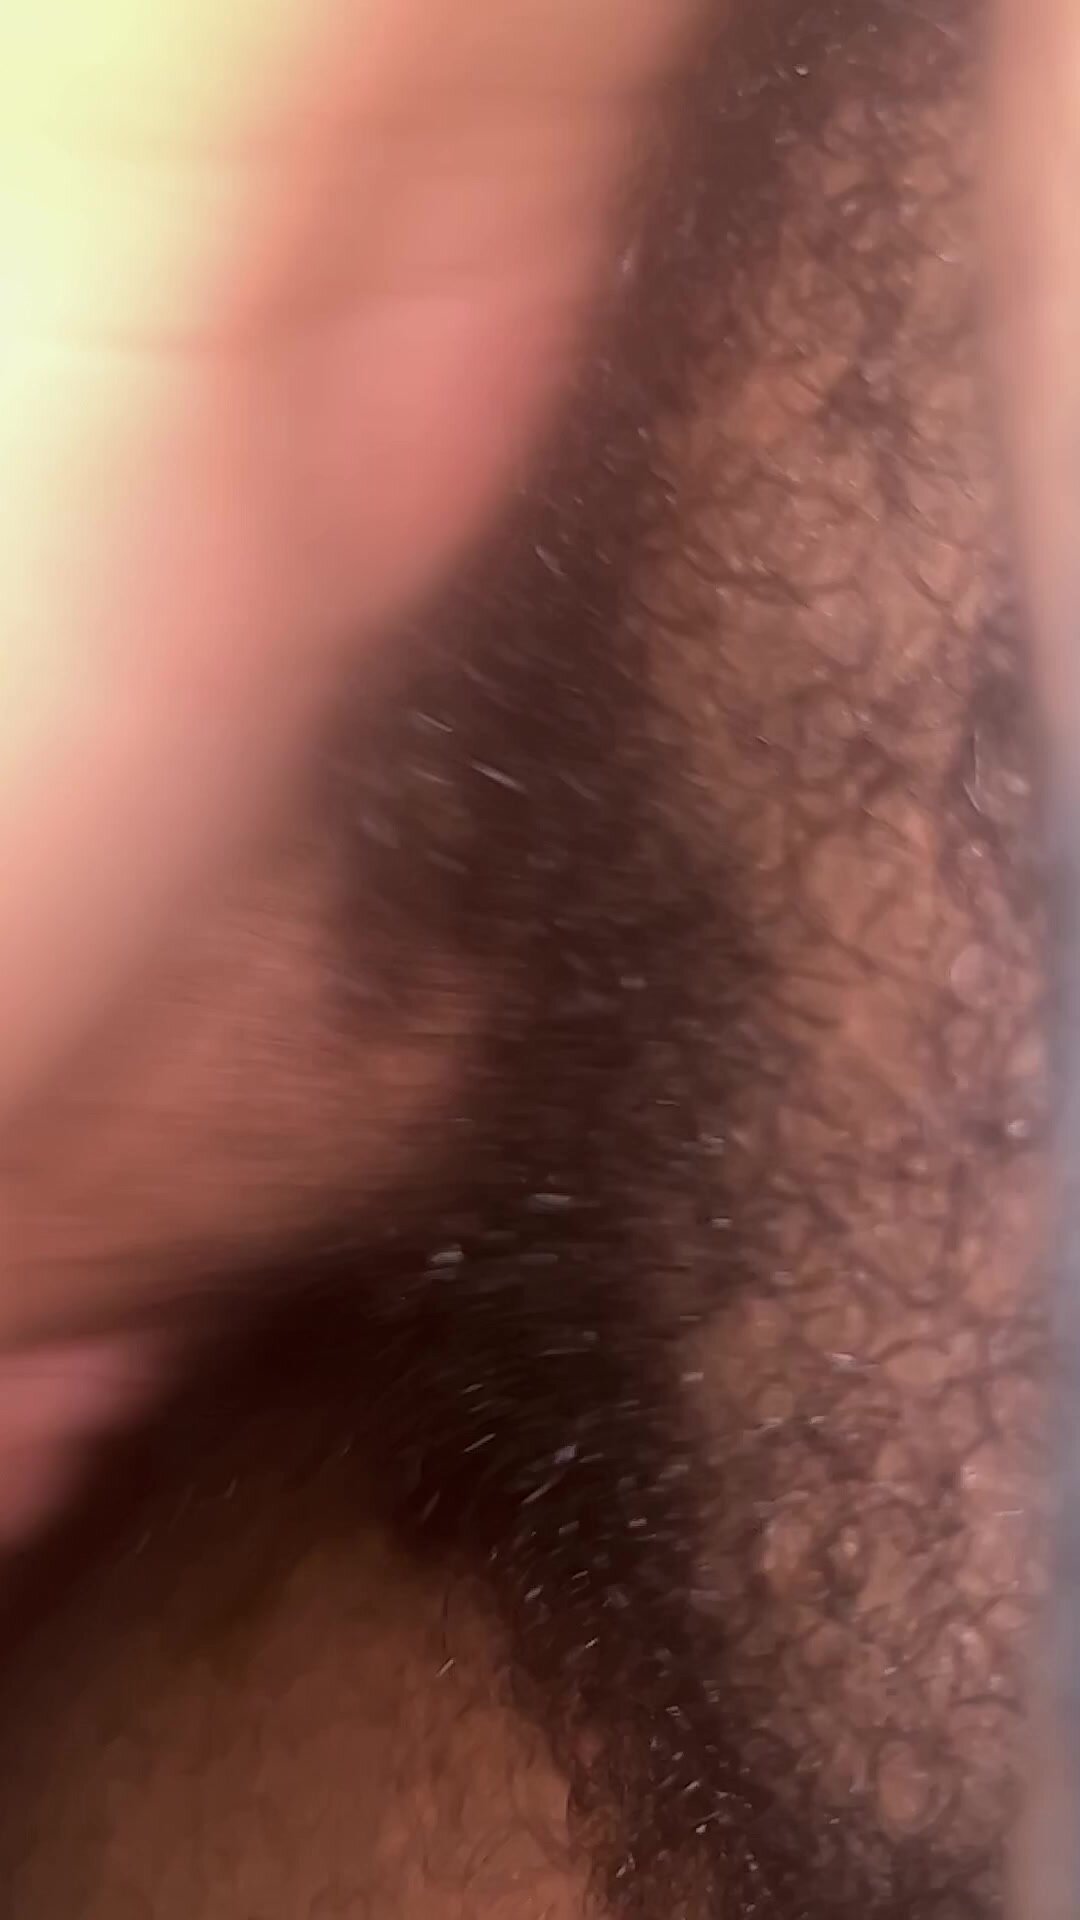 Jerking off with a tiny tangled in my pubes